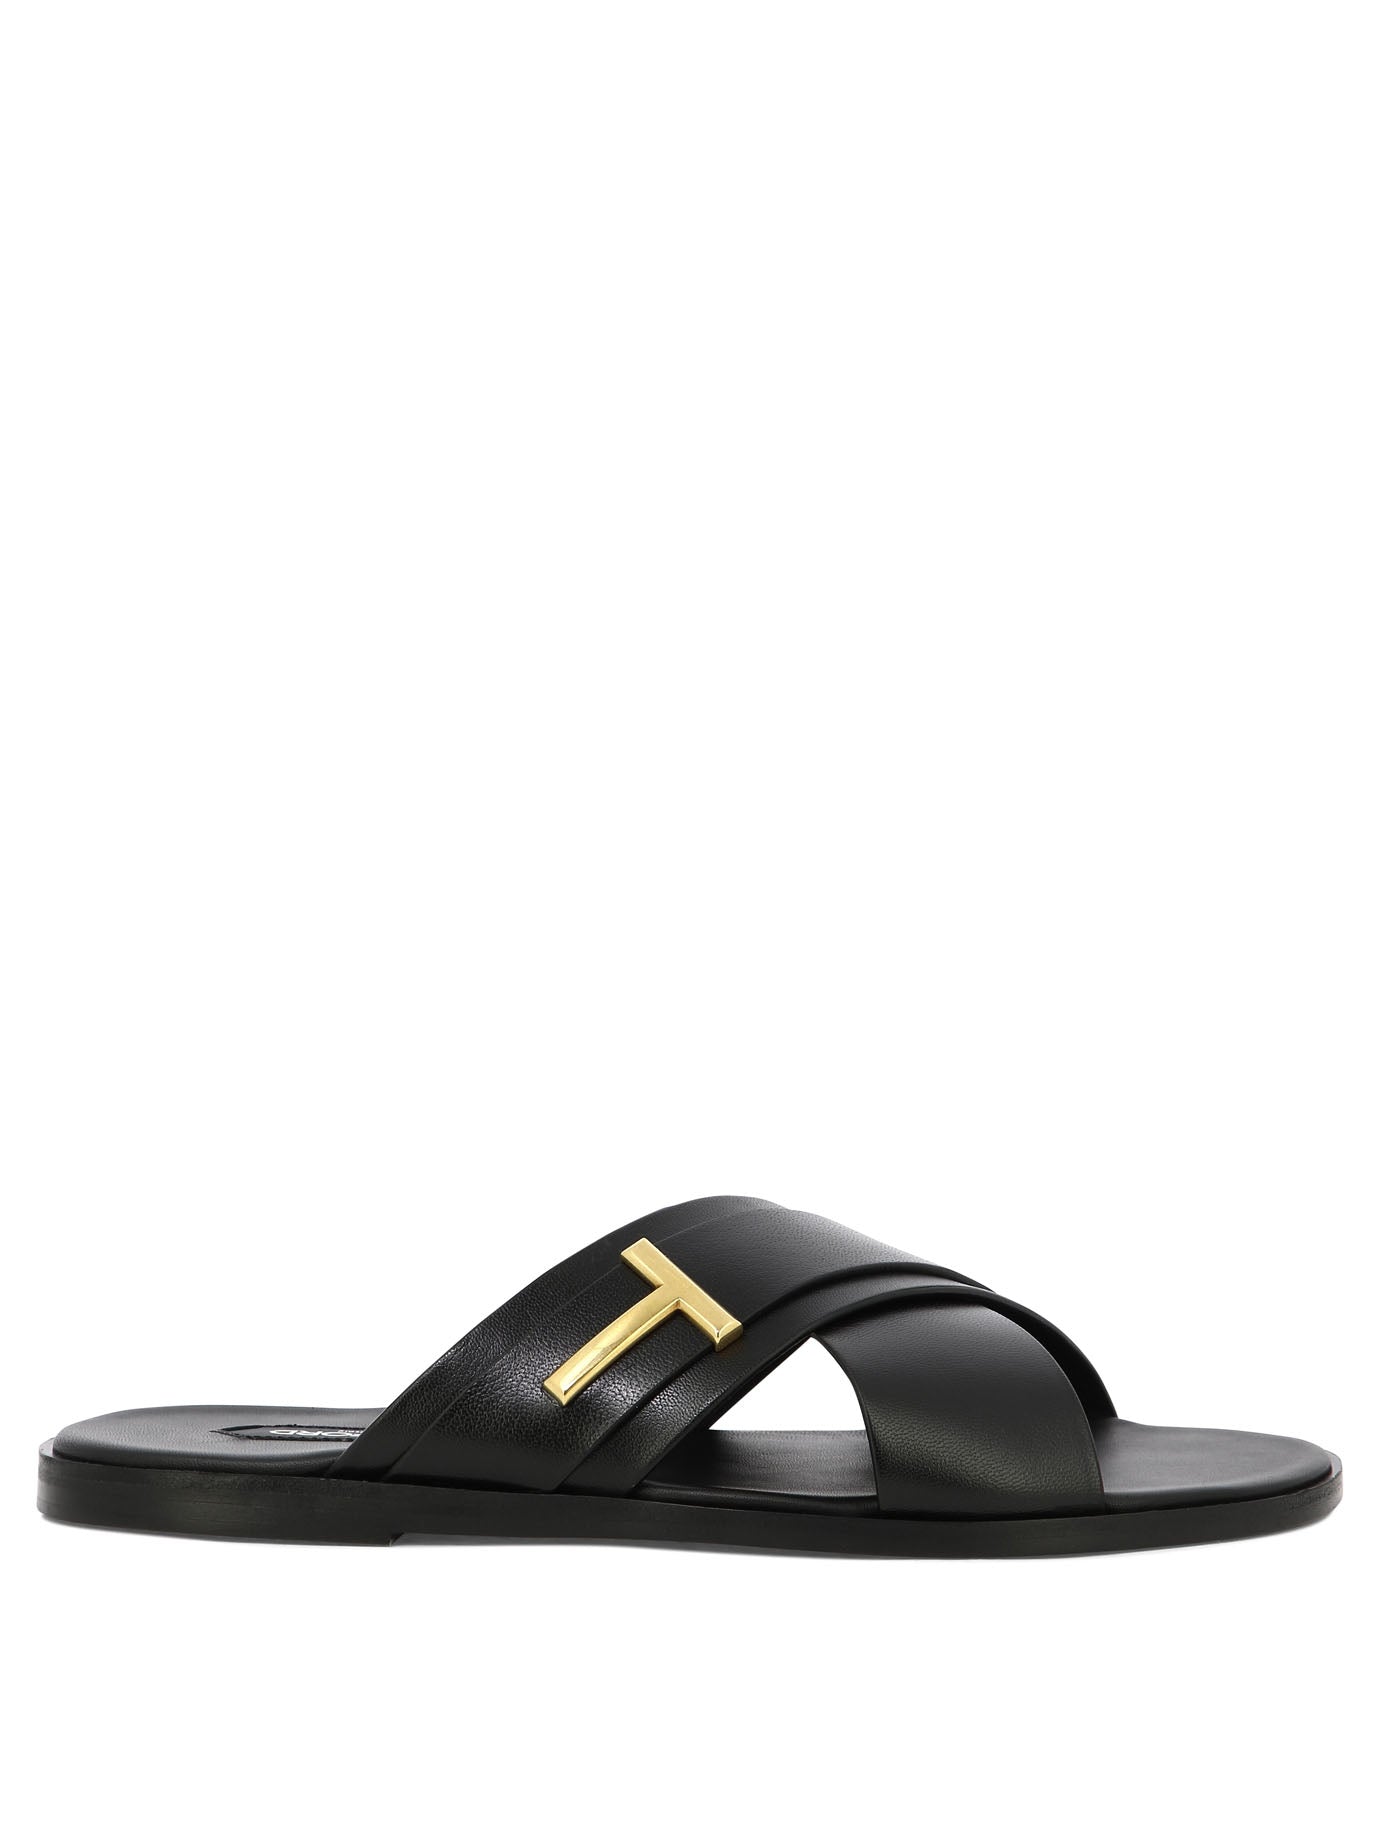 Shop Tom Ford Men's Leather Sandals For The Ultimate Style: 's Preston Collection In Black